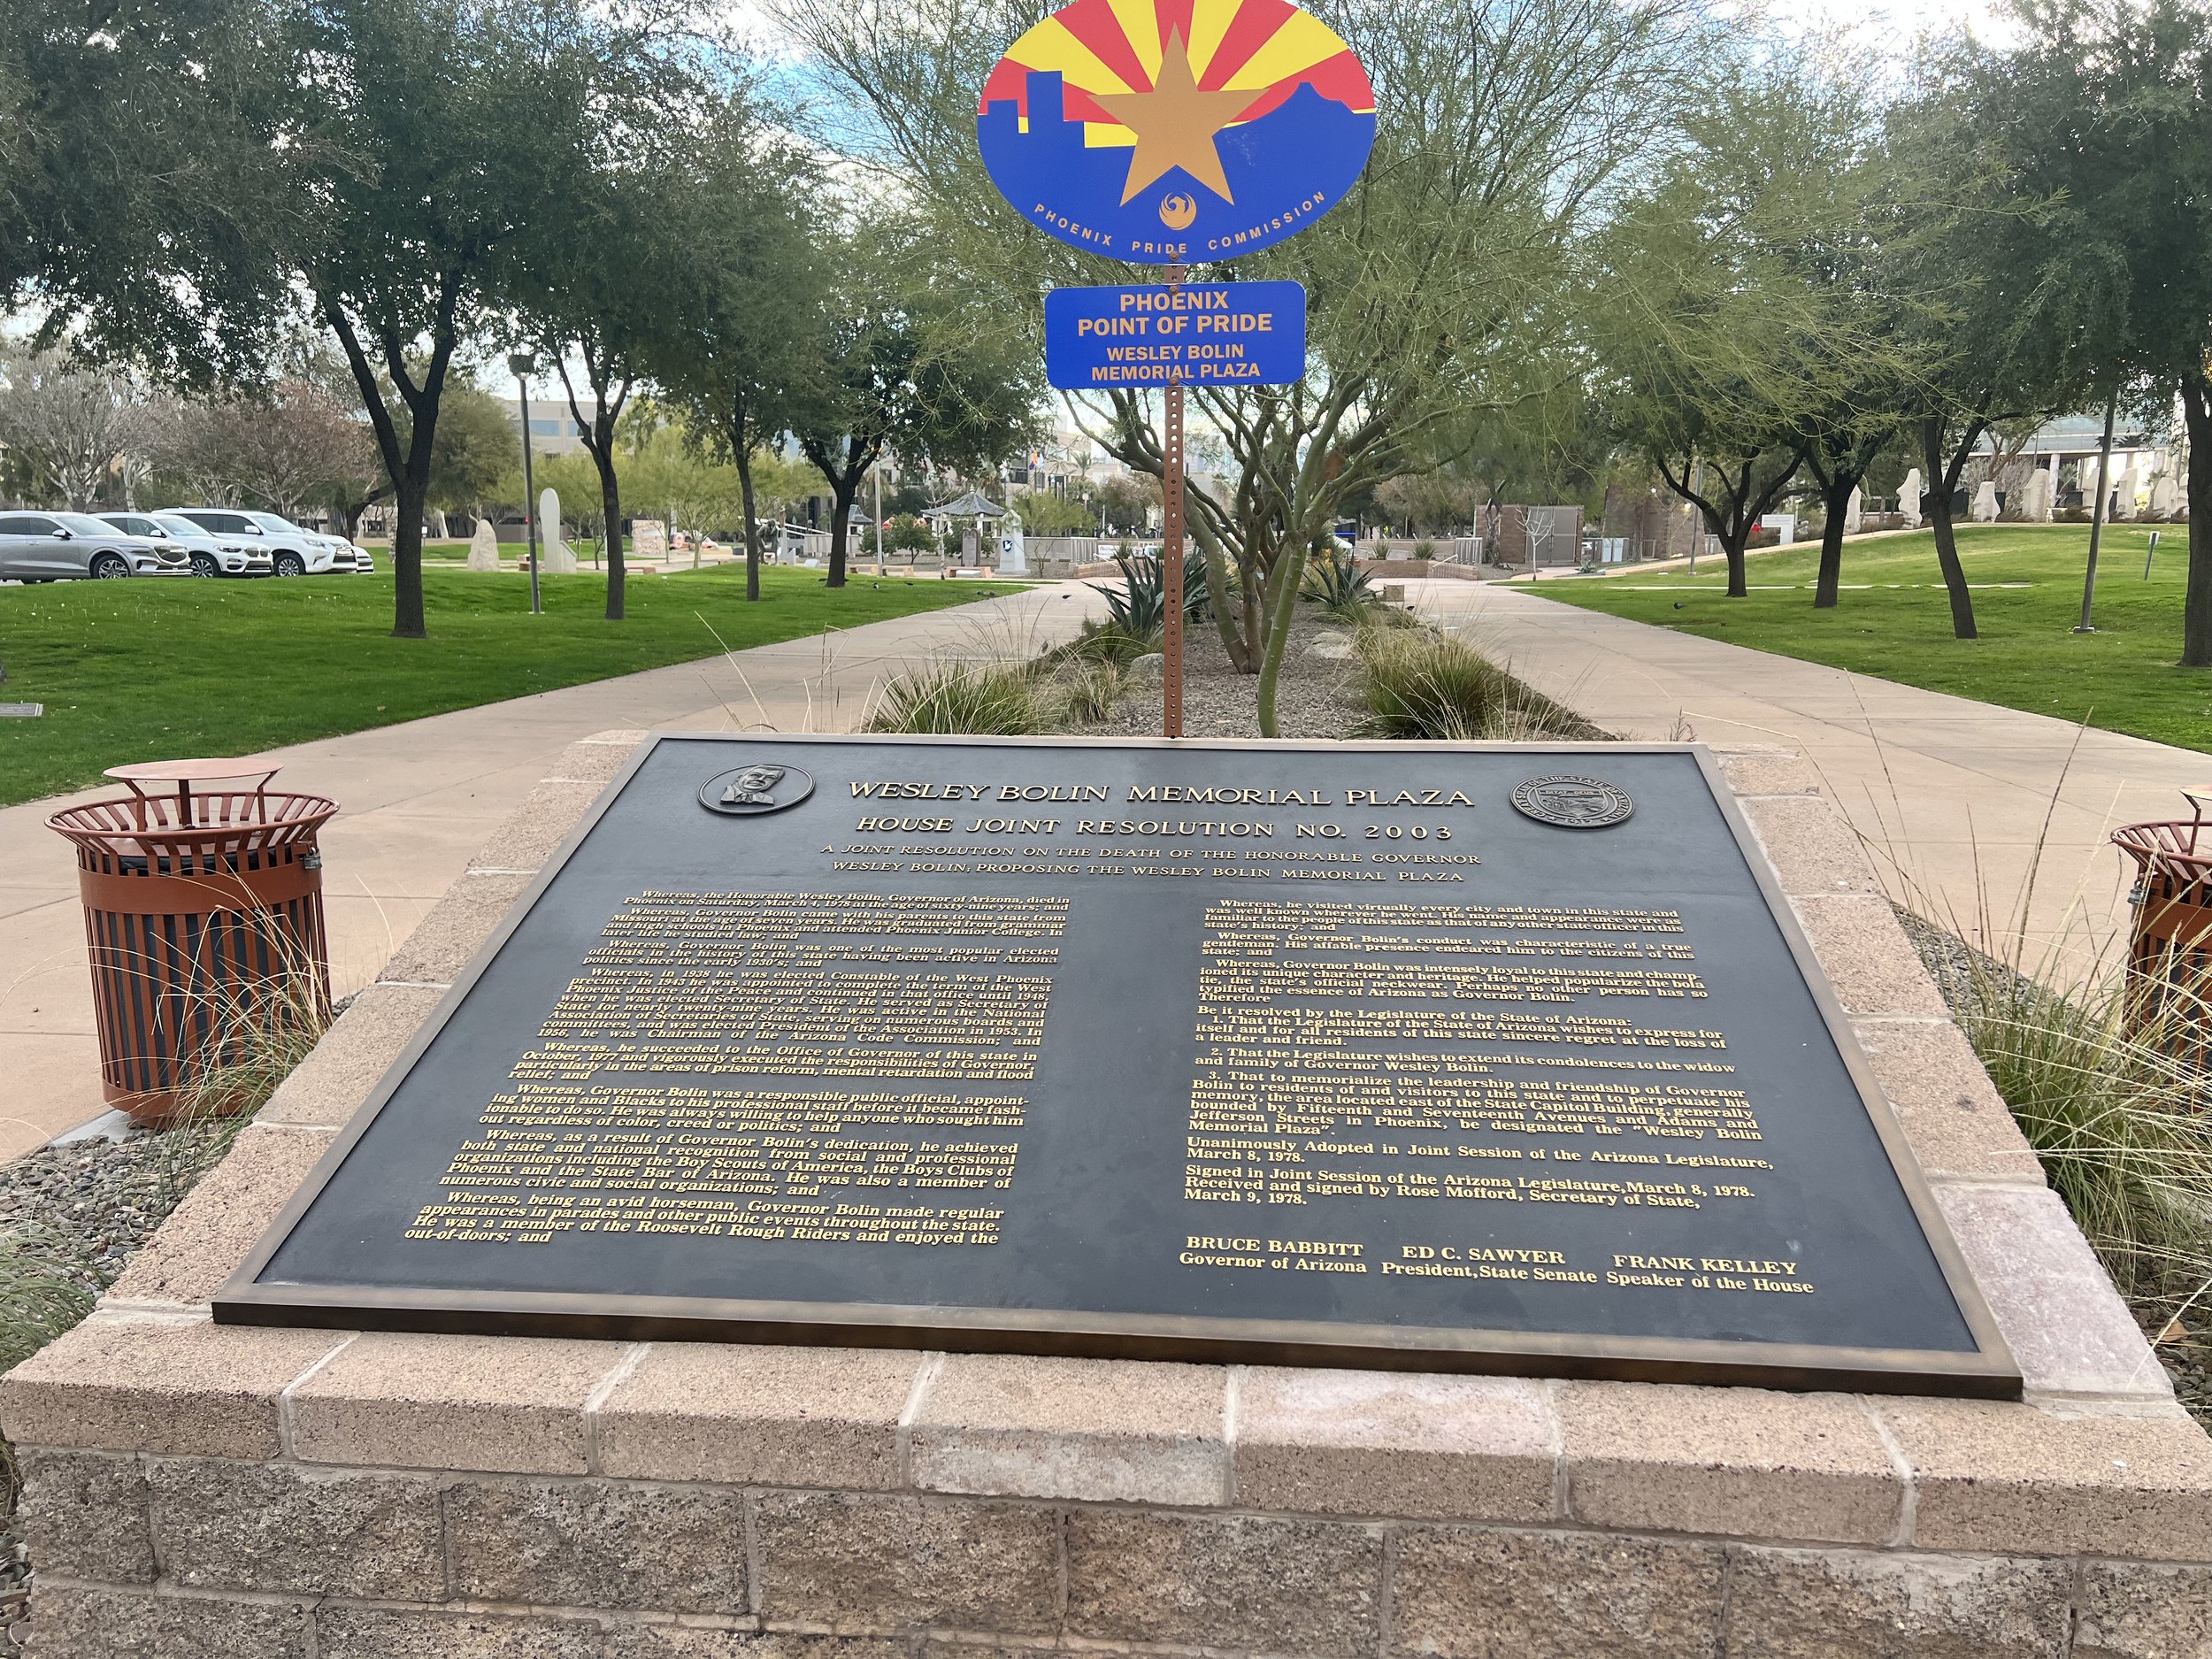  Wesley Bolin Memorial Plaza was created by House Joint Resolution No. 2003 under Governor Bruce Babbitt. 